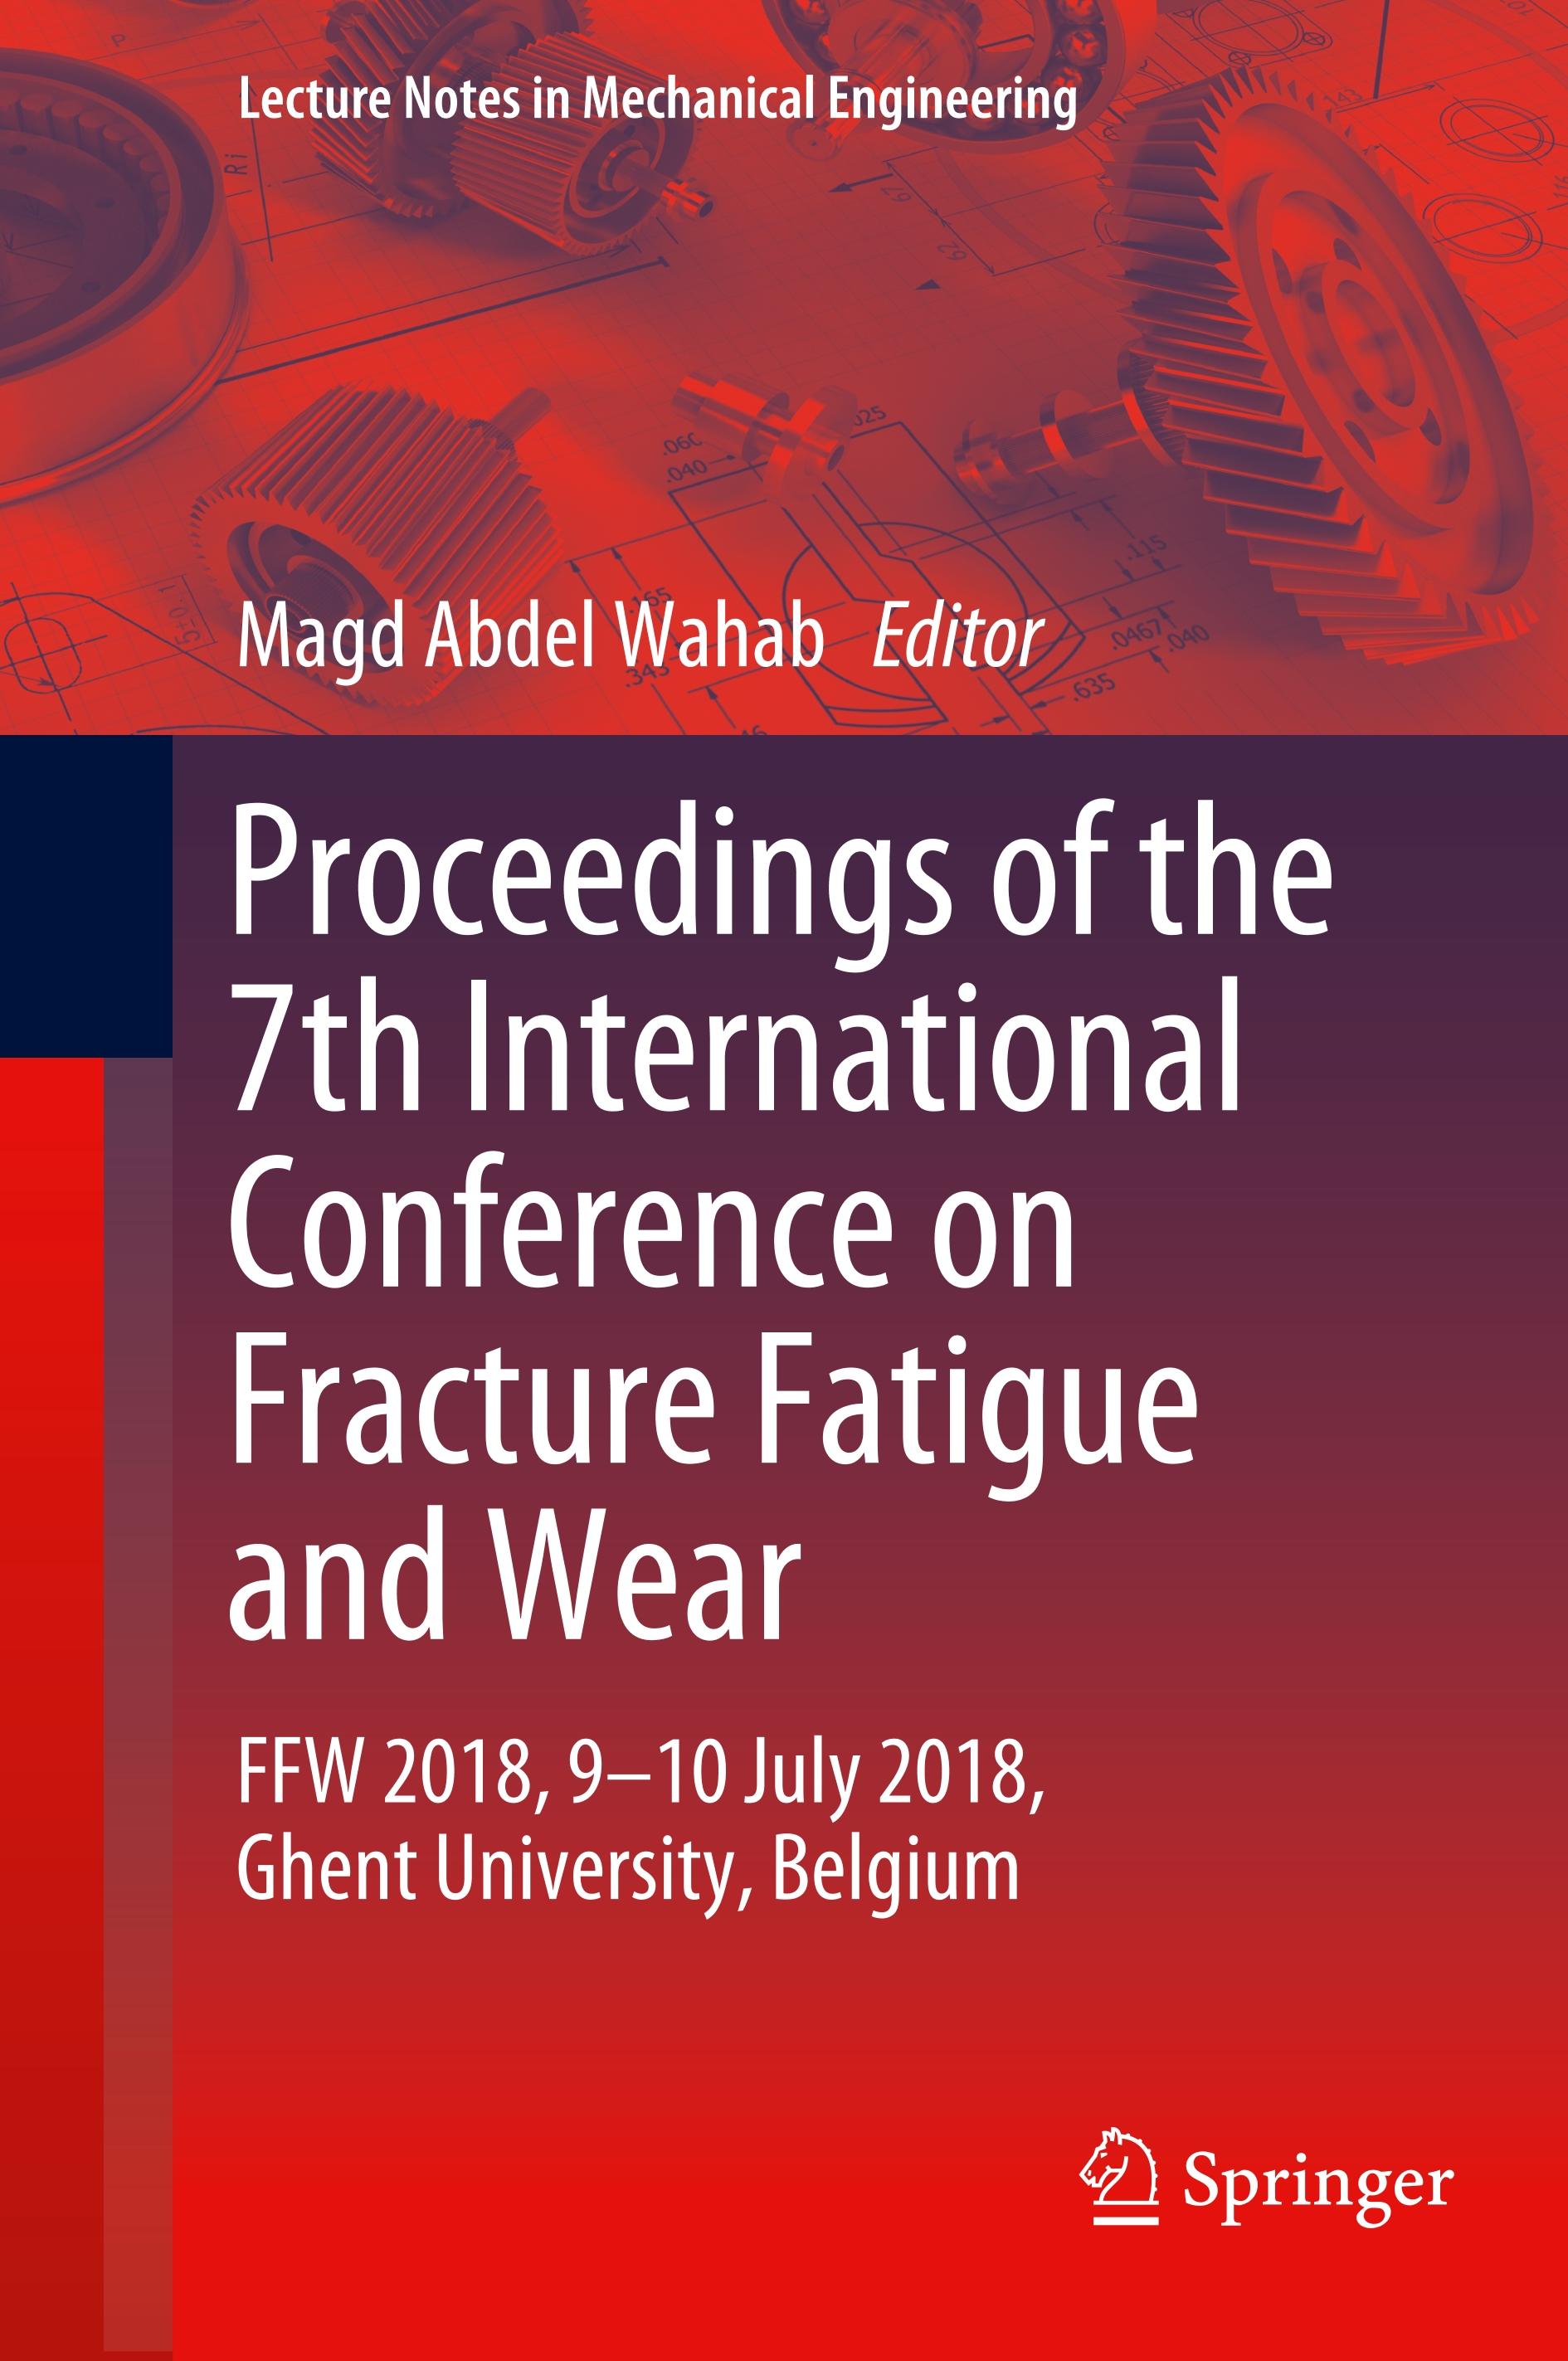 Proceedings of the 7th International Conference on Fracture Fatigue and Wear - Abdel Wahab, Magd